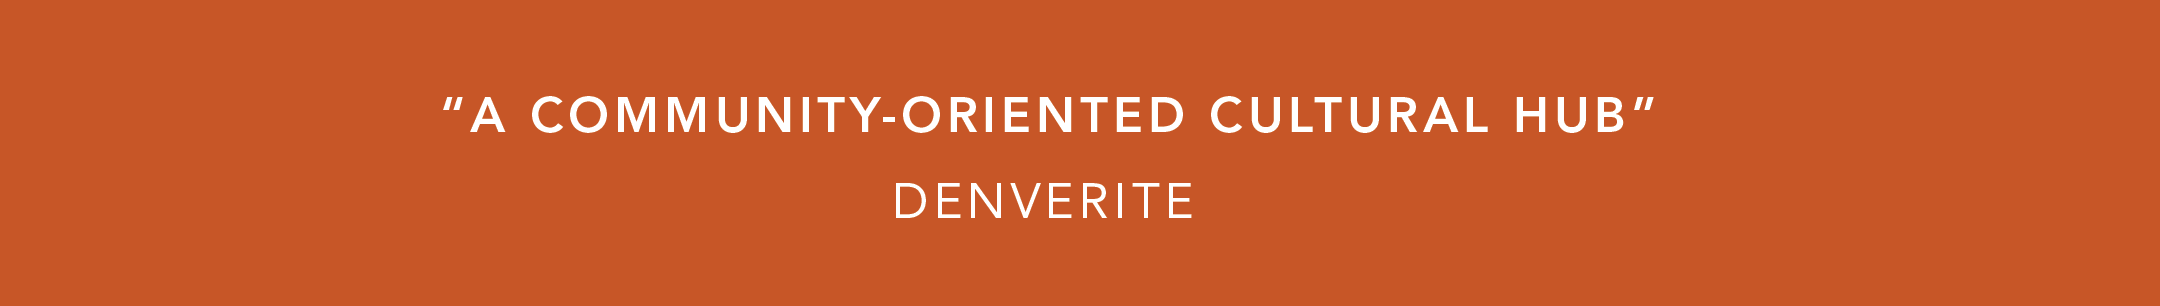 White text on an orange background. The text reads, "A community-oriented cultural hub."